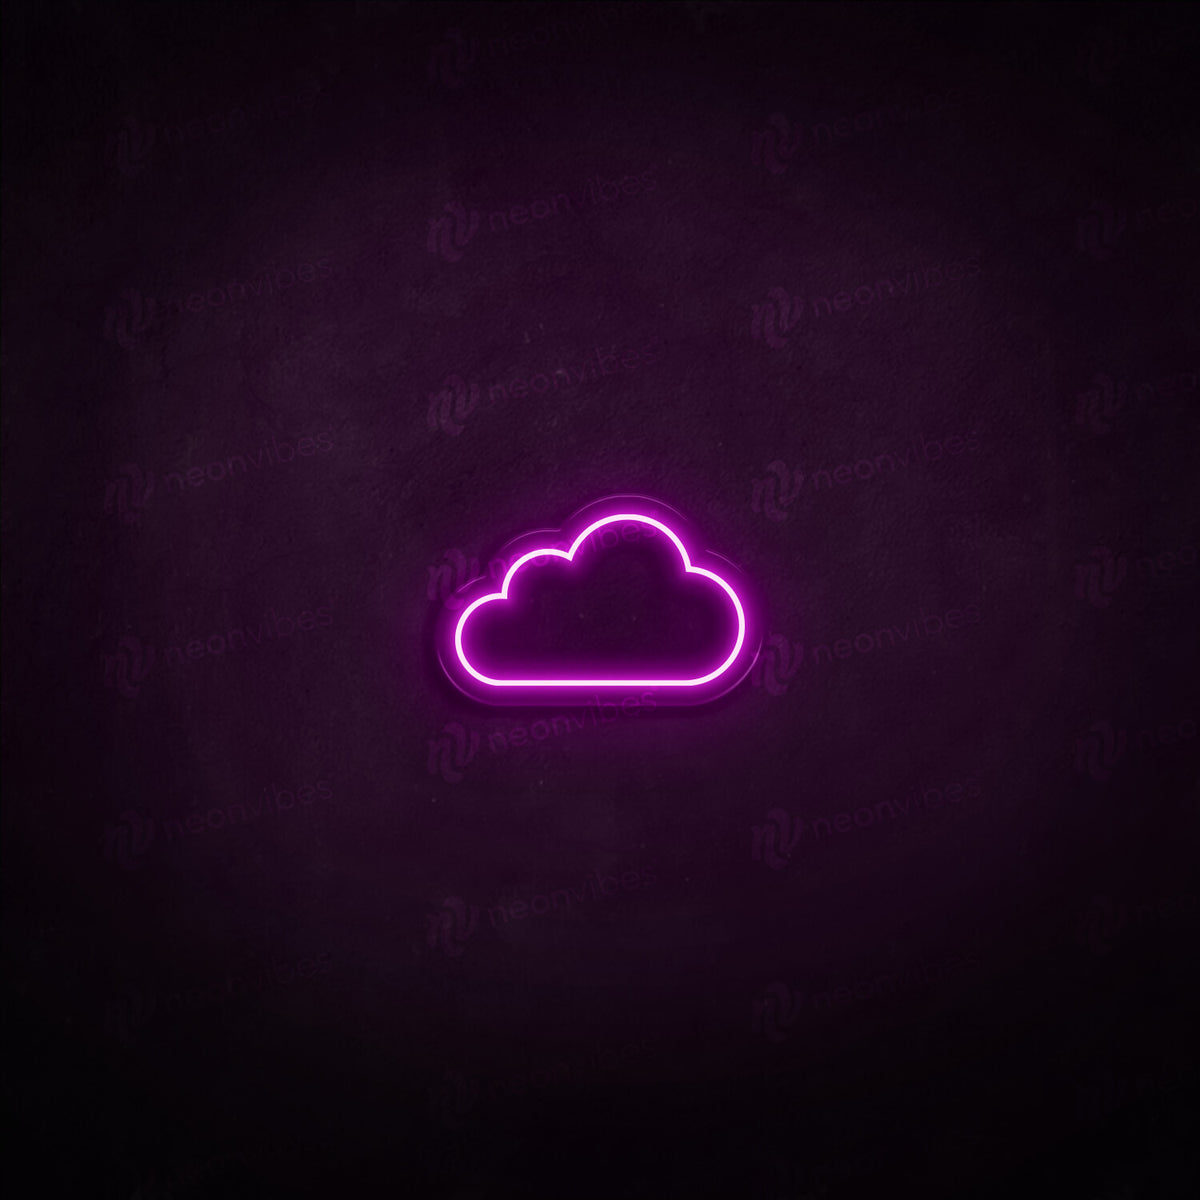 Small Cloud neon sign